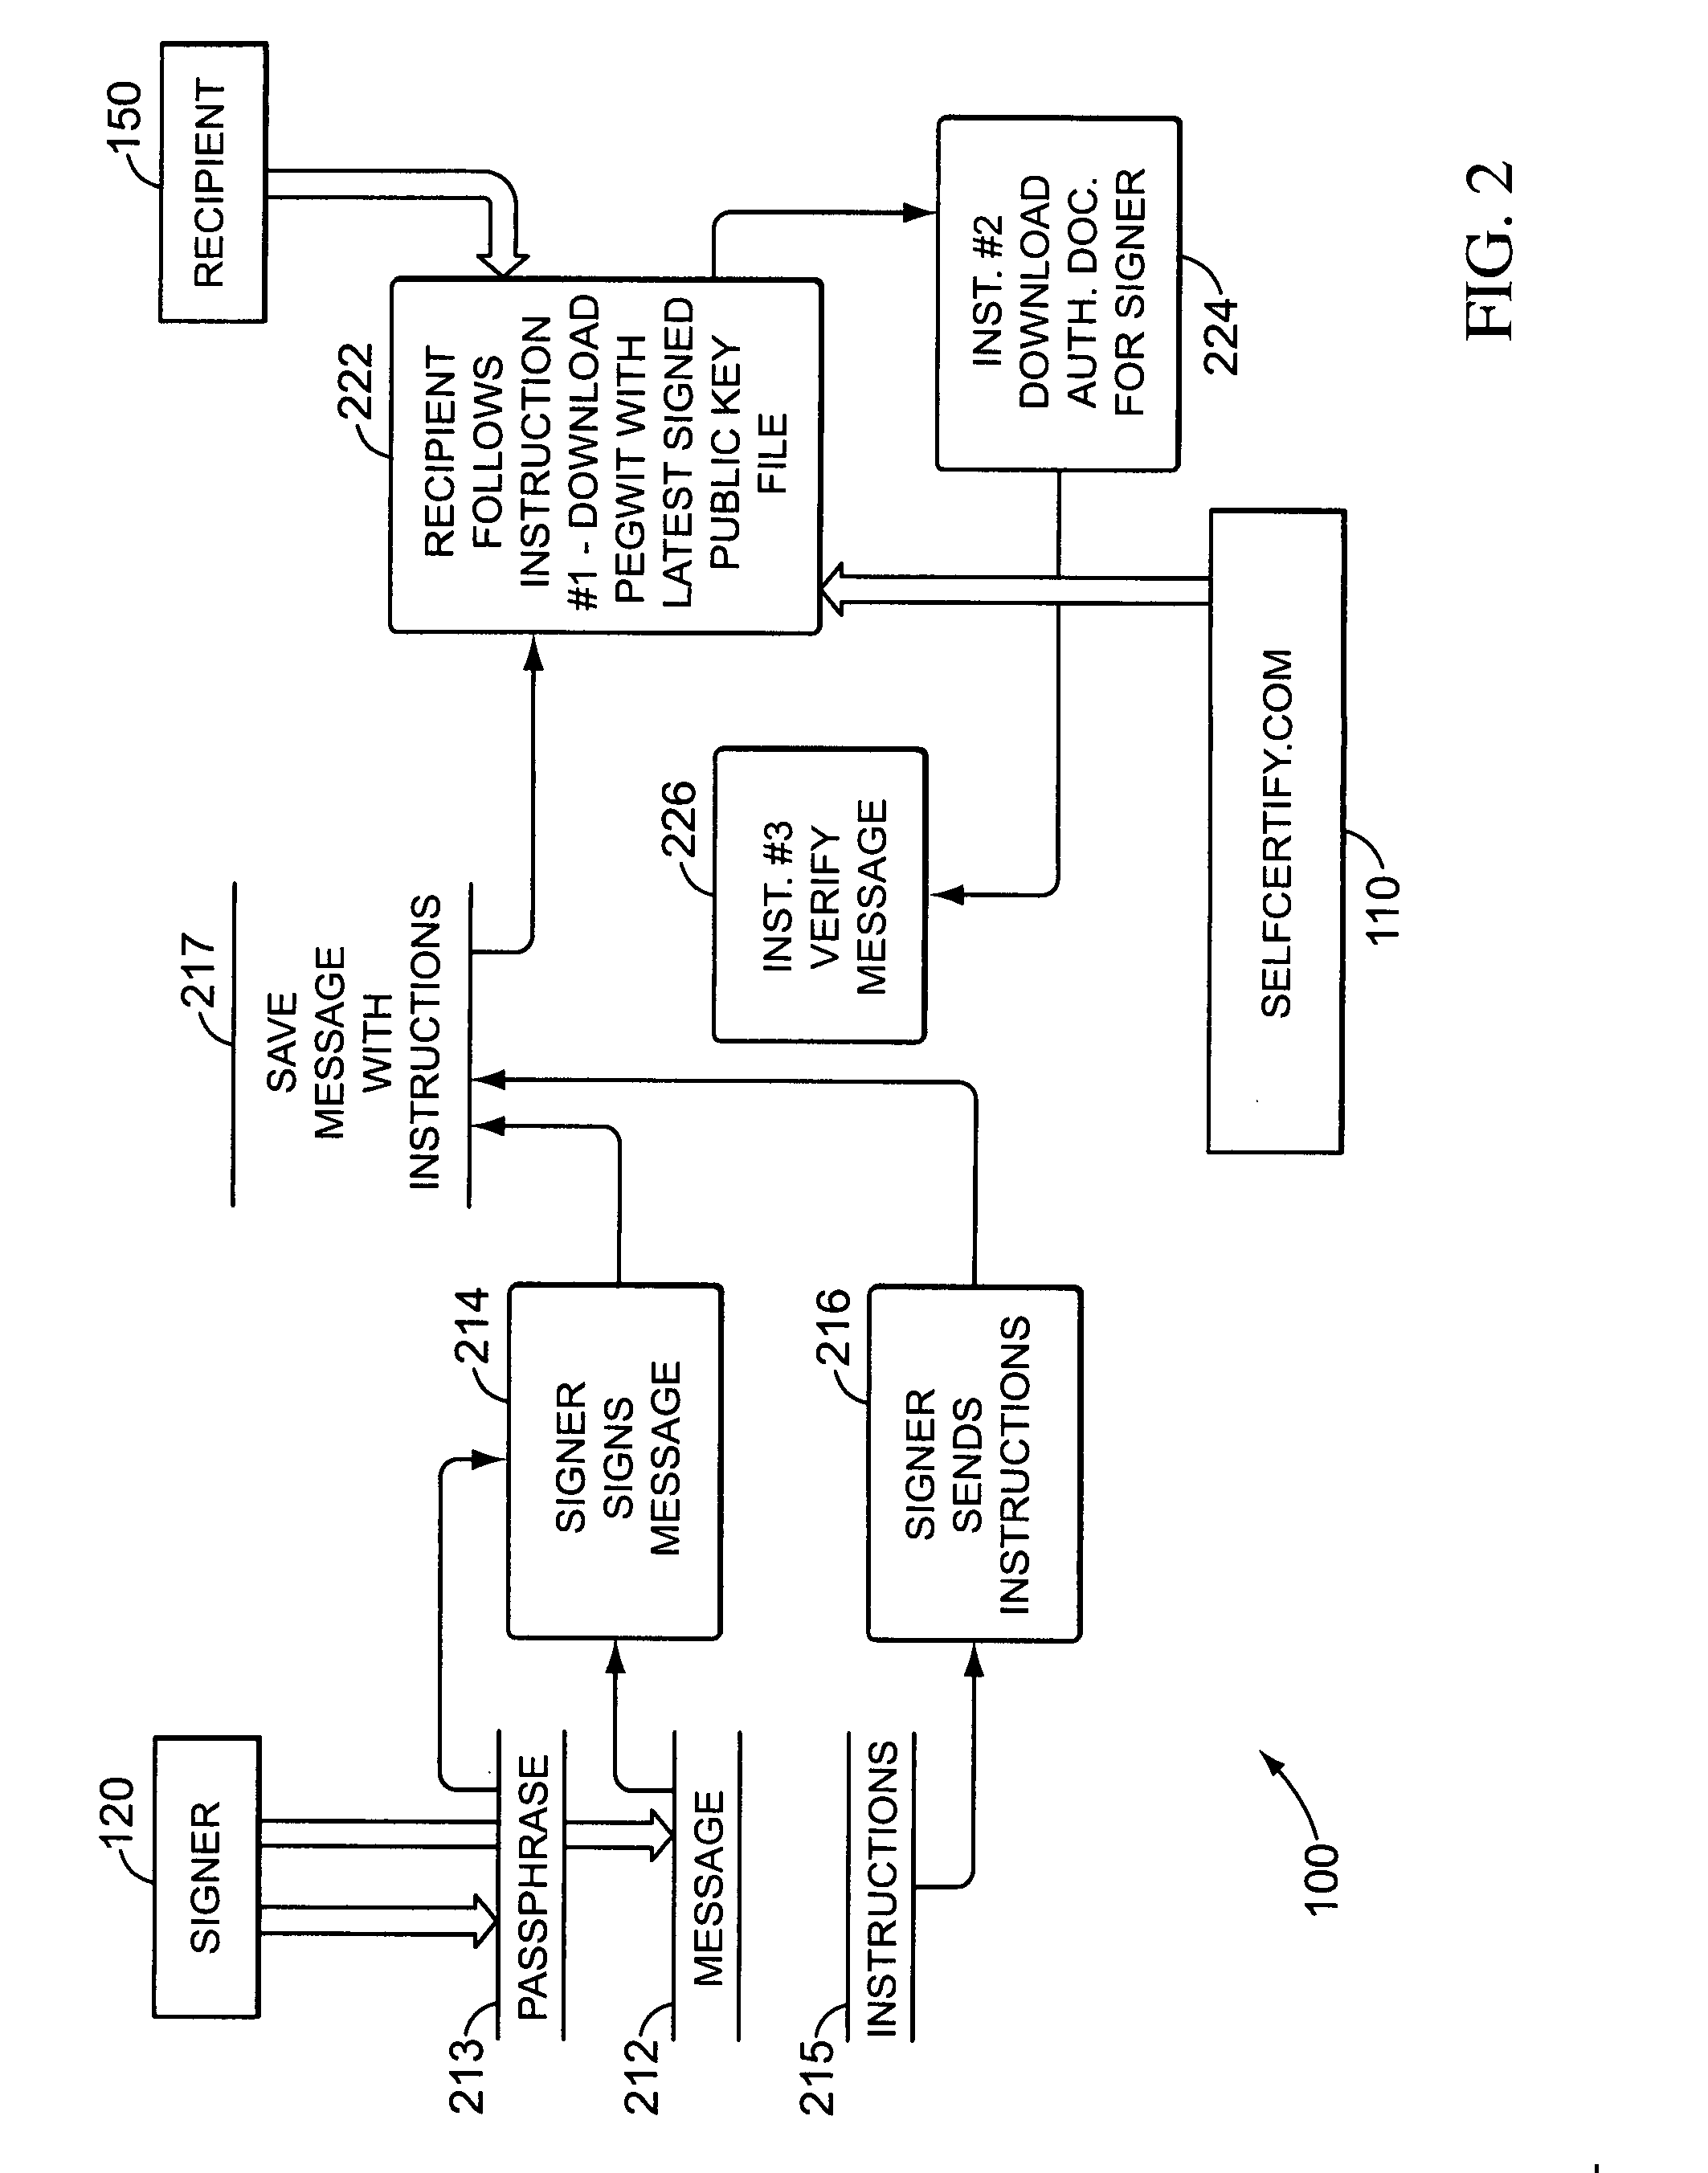 Encryption and authentication systems and methods